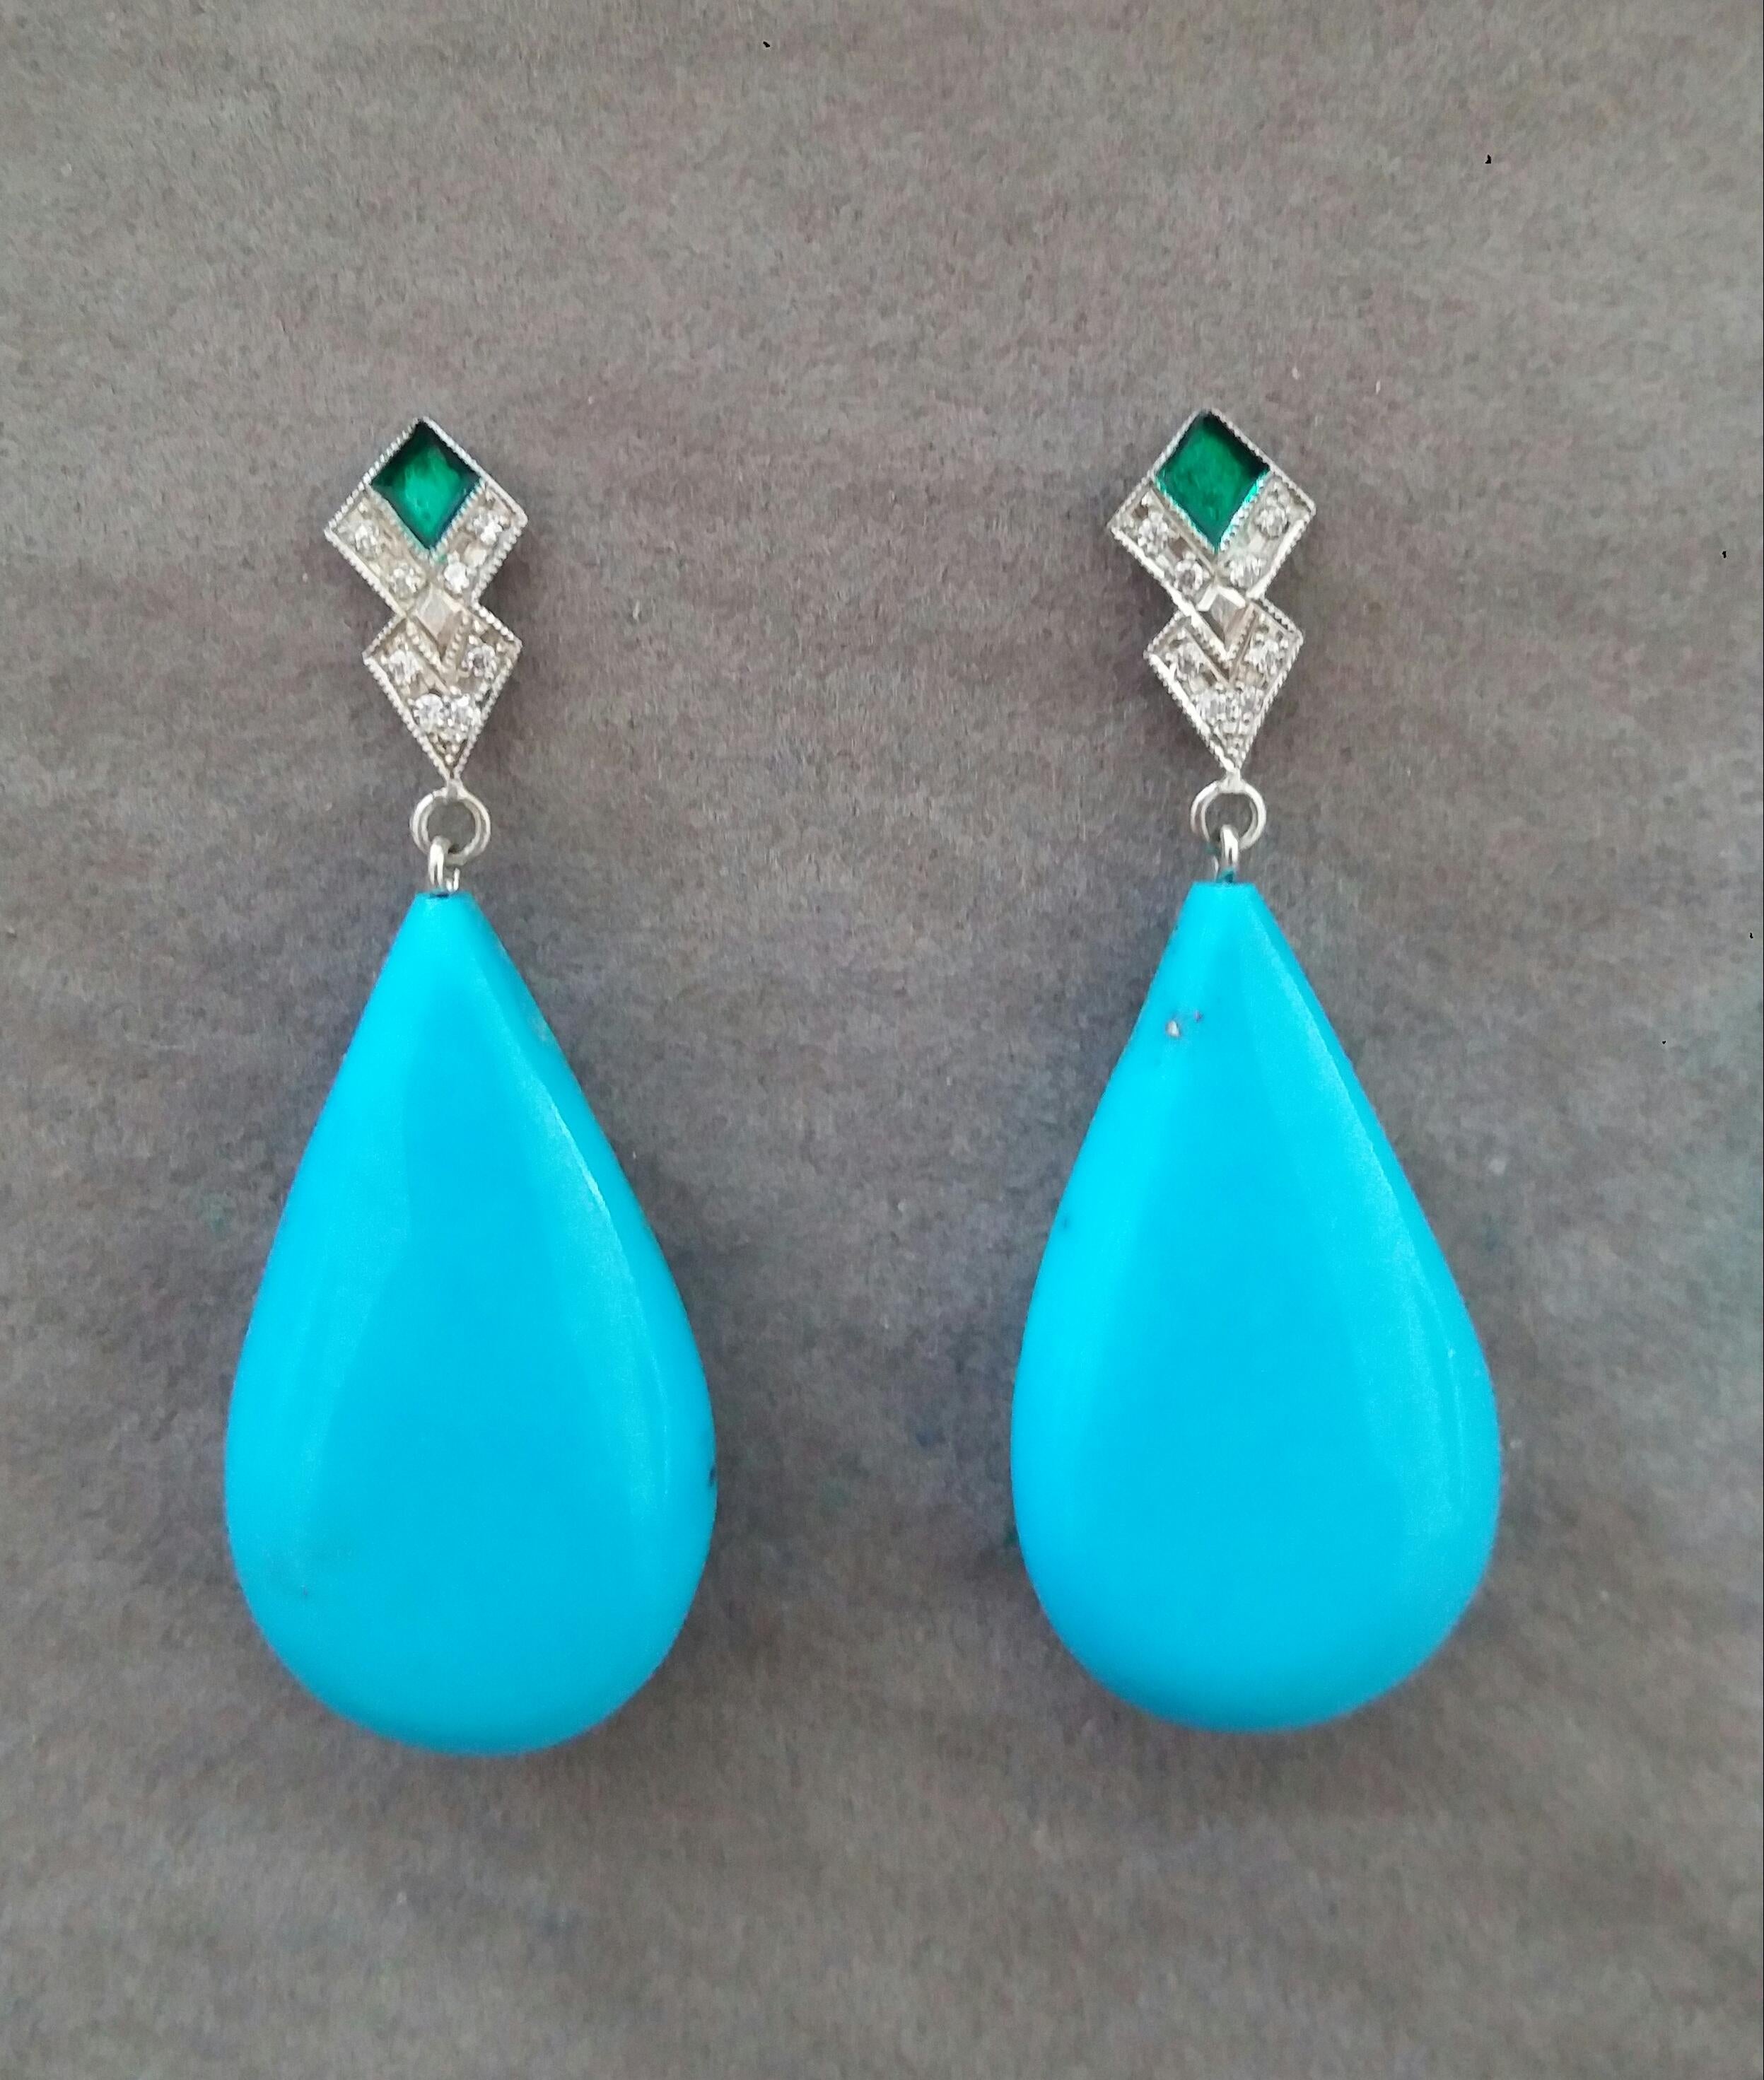 In these classic Art Deco Style earrings the tops are 2 elements  in 14 kt. white gold, 16 round full cut diamonds and Green Enamel,,in the lower parts we have 2 Natural Turquoise Plain Drops   measuring 17 x 30 mm 
These earrings will arrive at